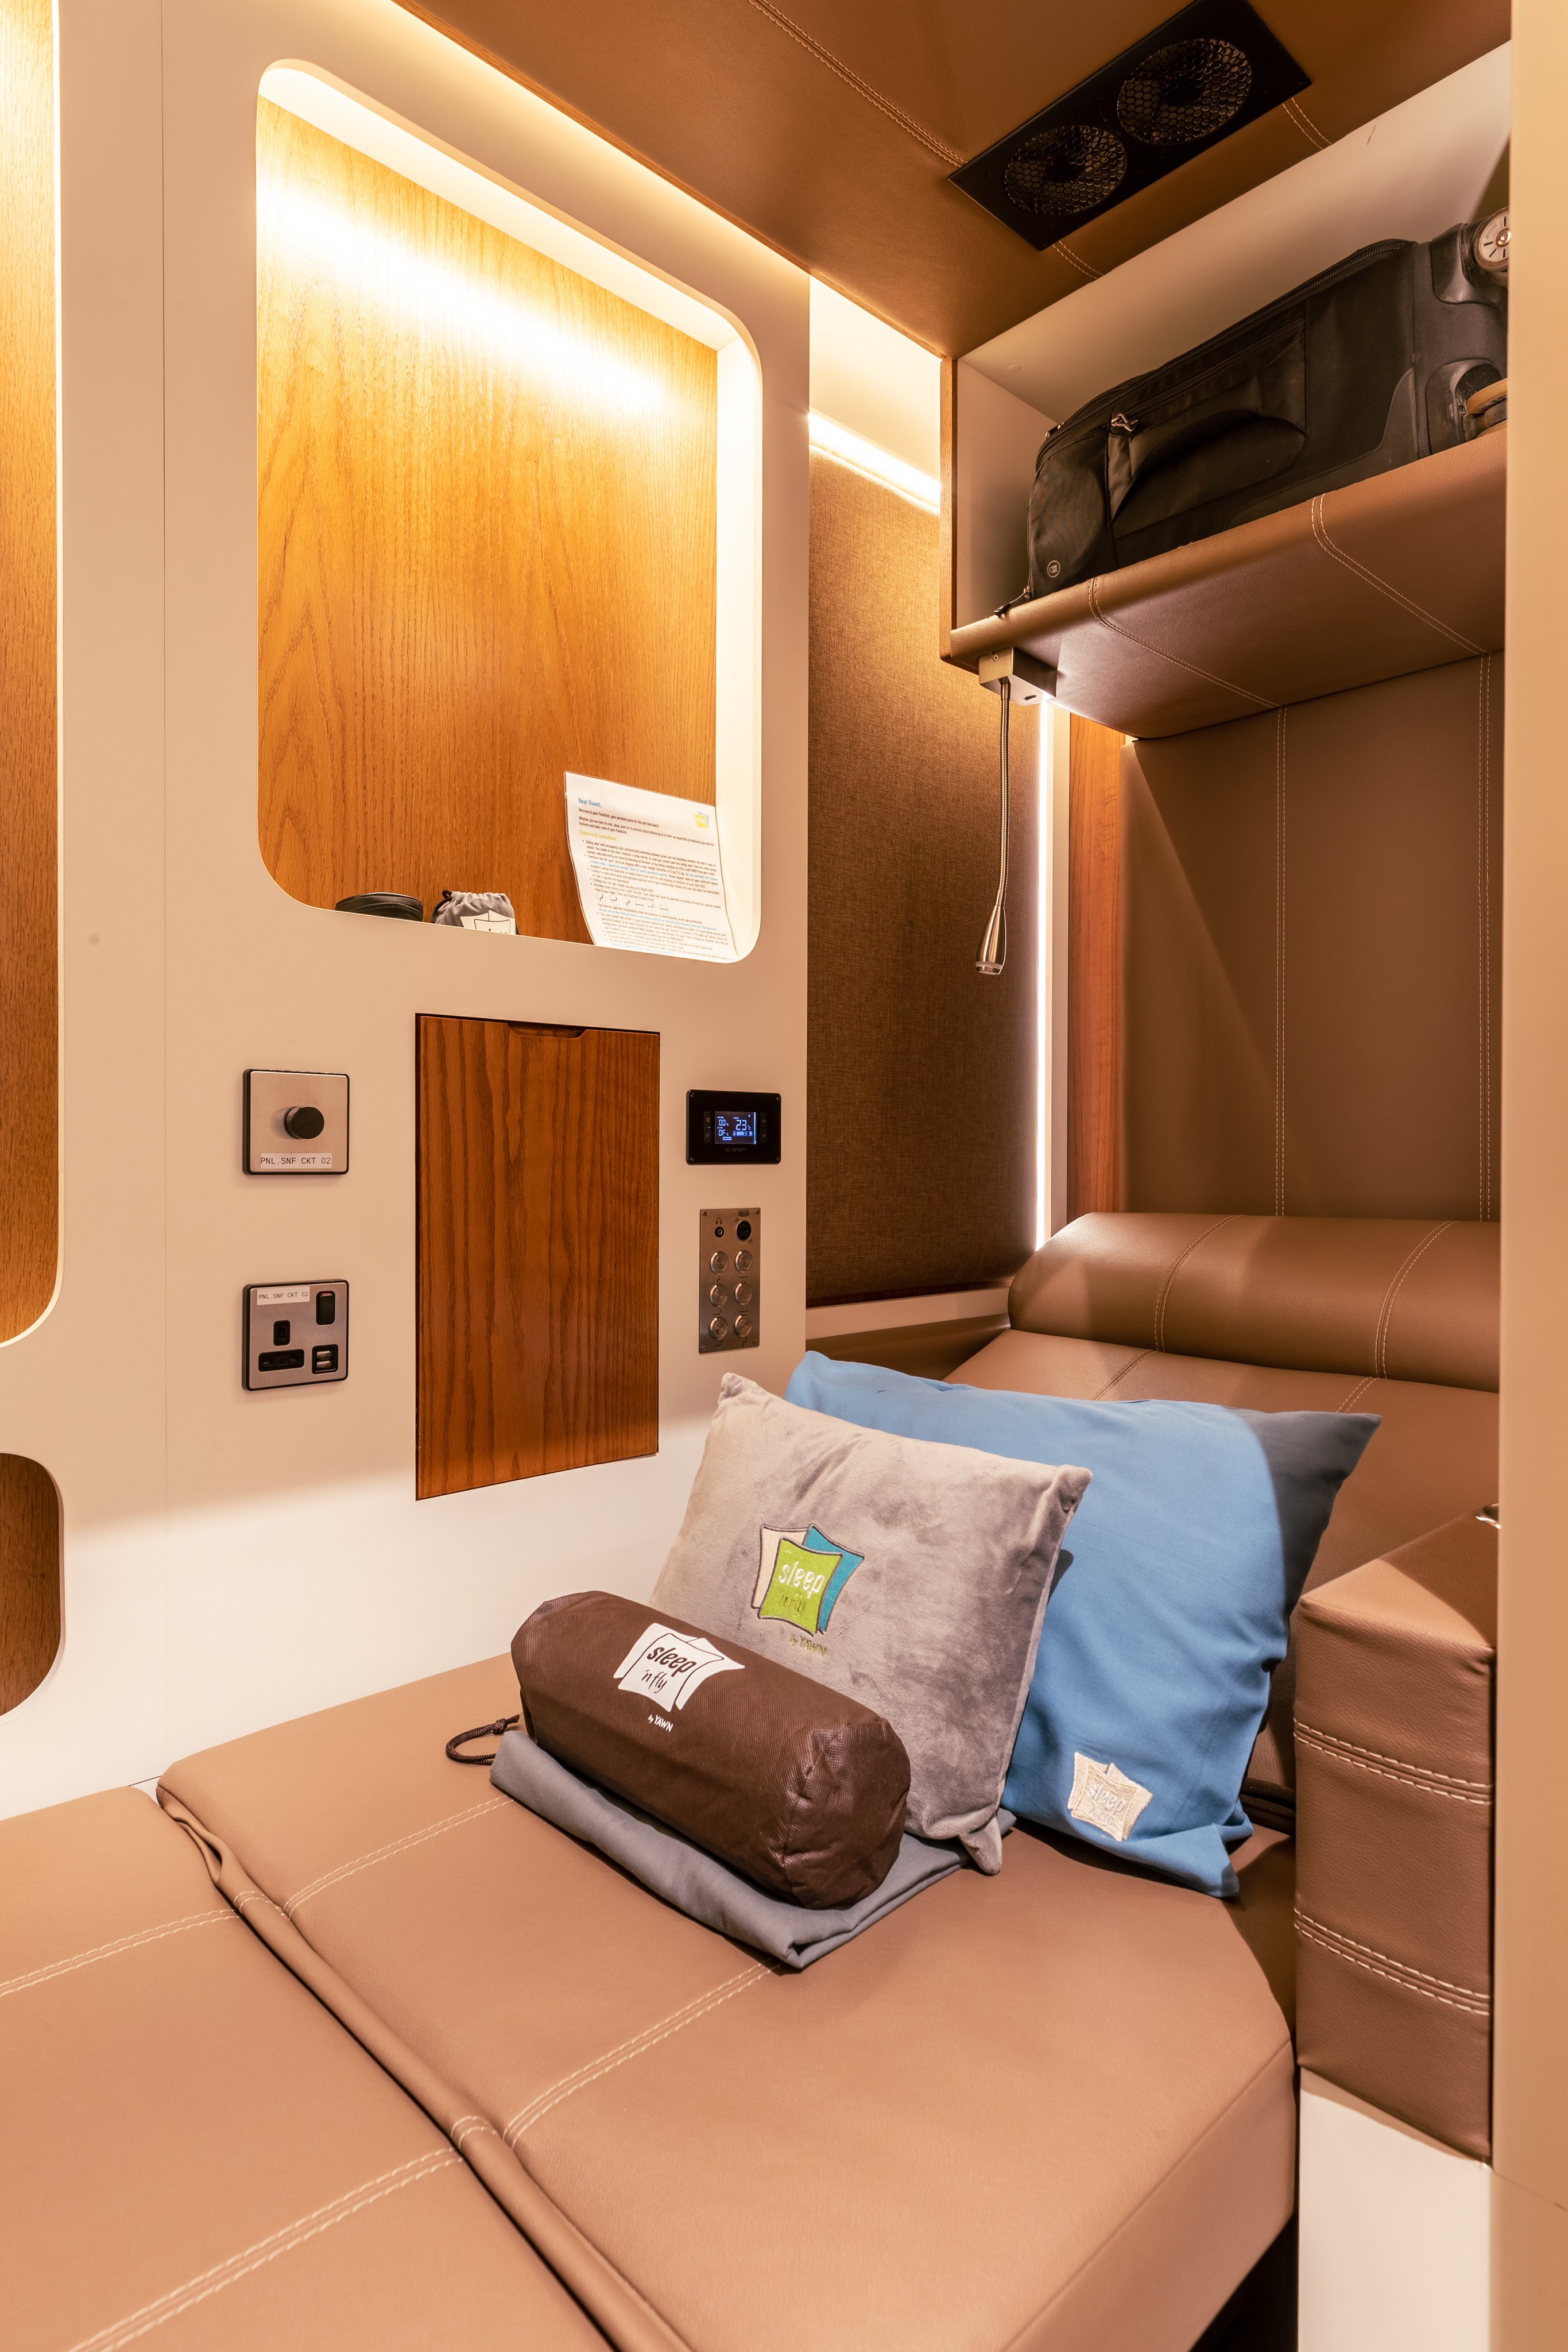 Qatar Airways Enjoy The Sleeping Pods Available At Hiaqatar Sleepnfly Features A Mix Of Flexisuite Pods For Single Travellers Double Cabins For Double Or Single Use As Well As Bunk Cabins